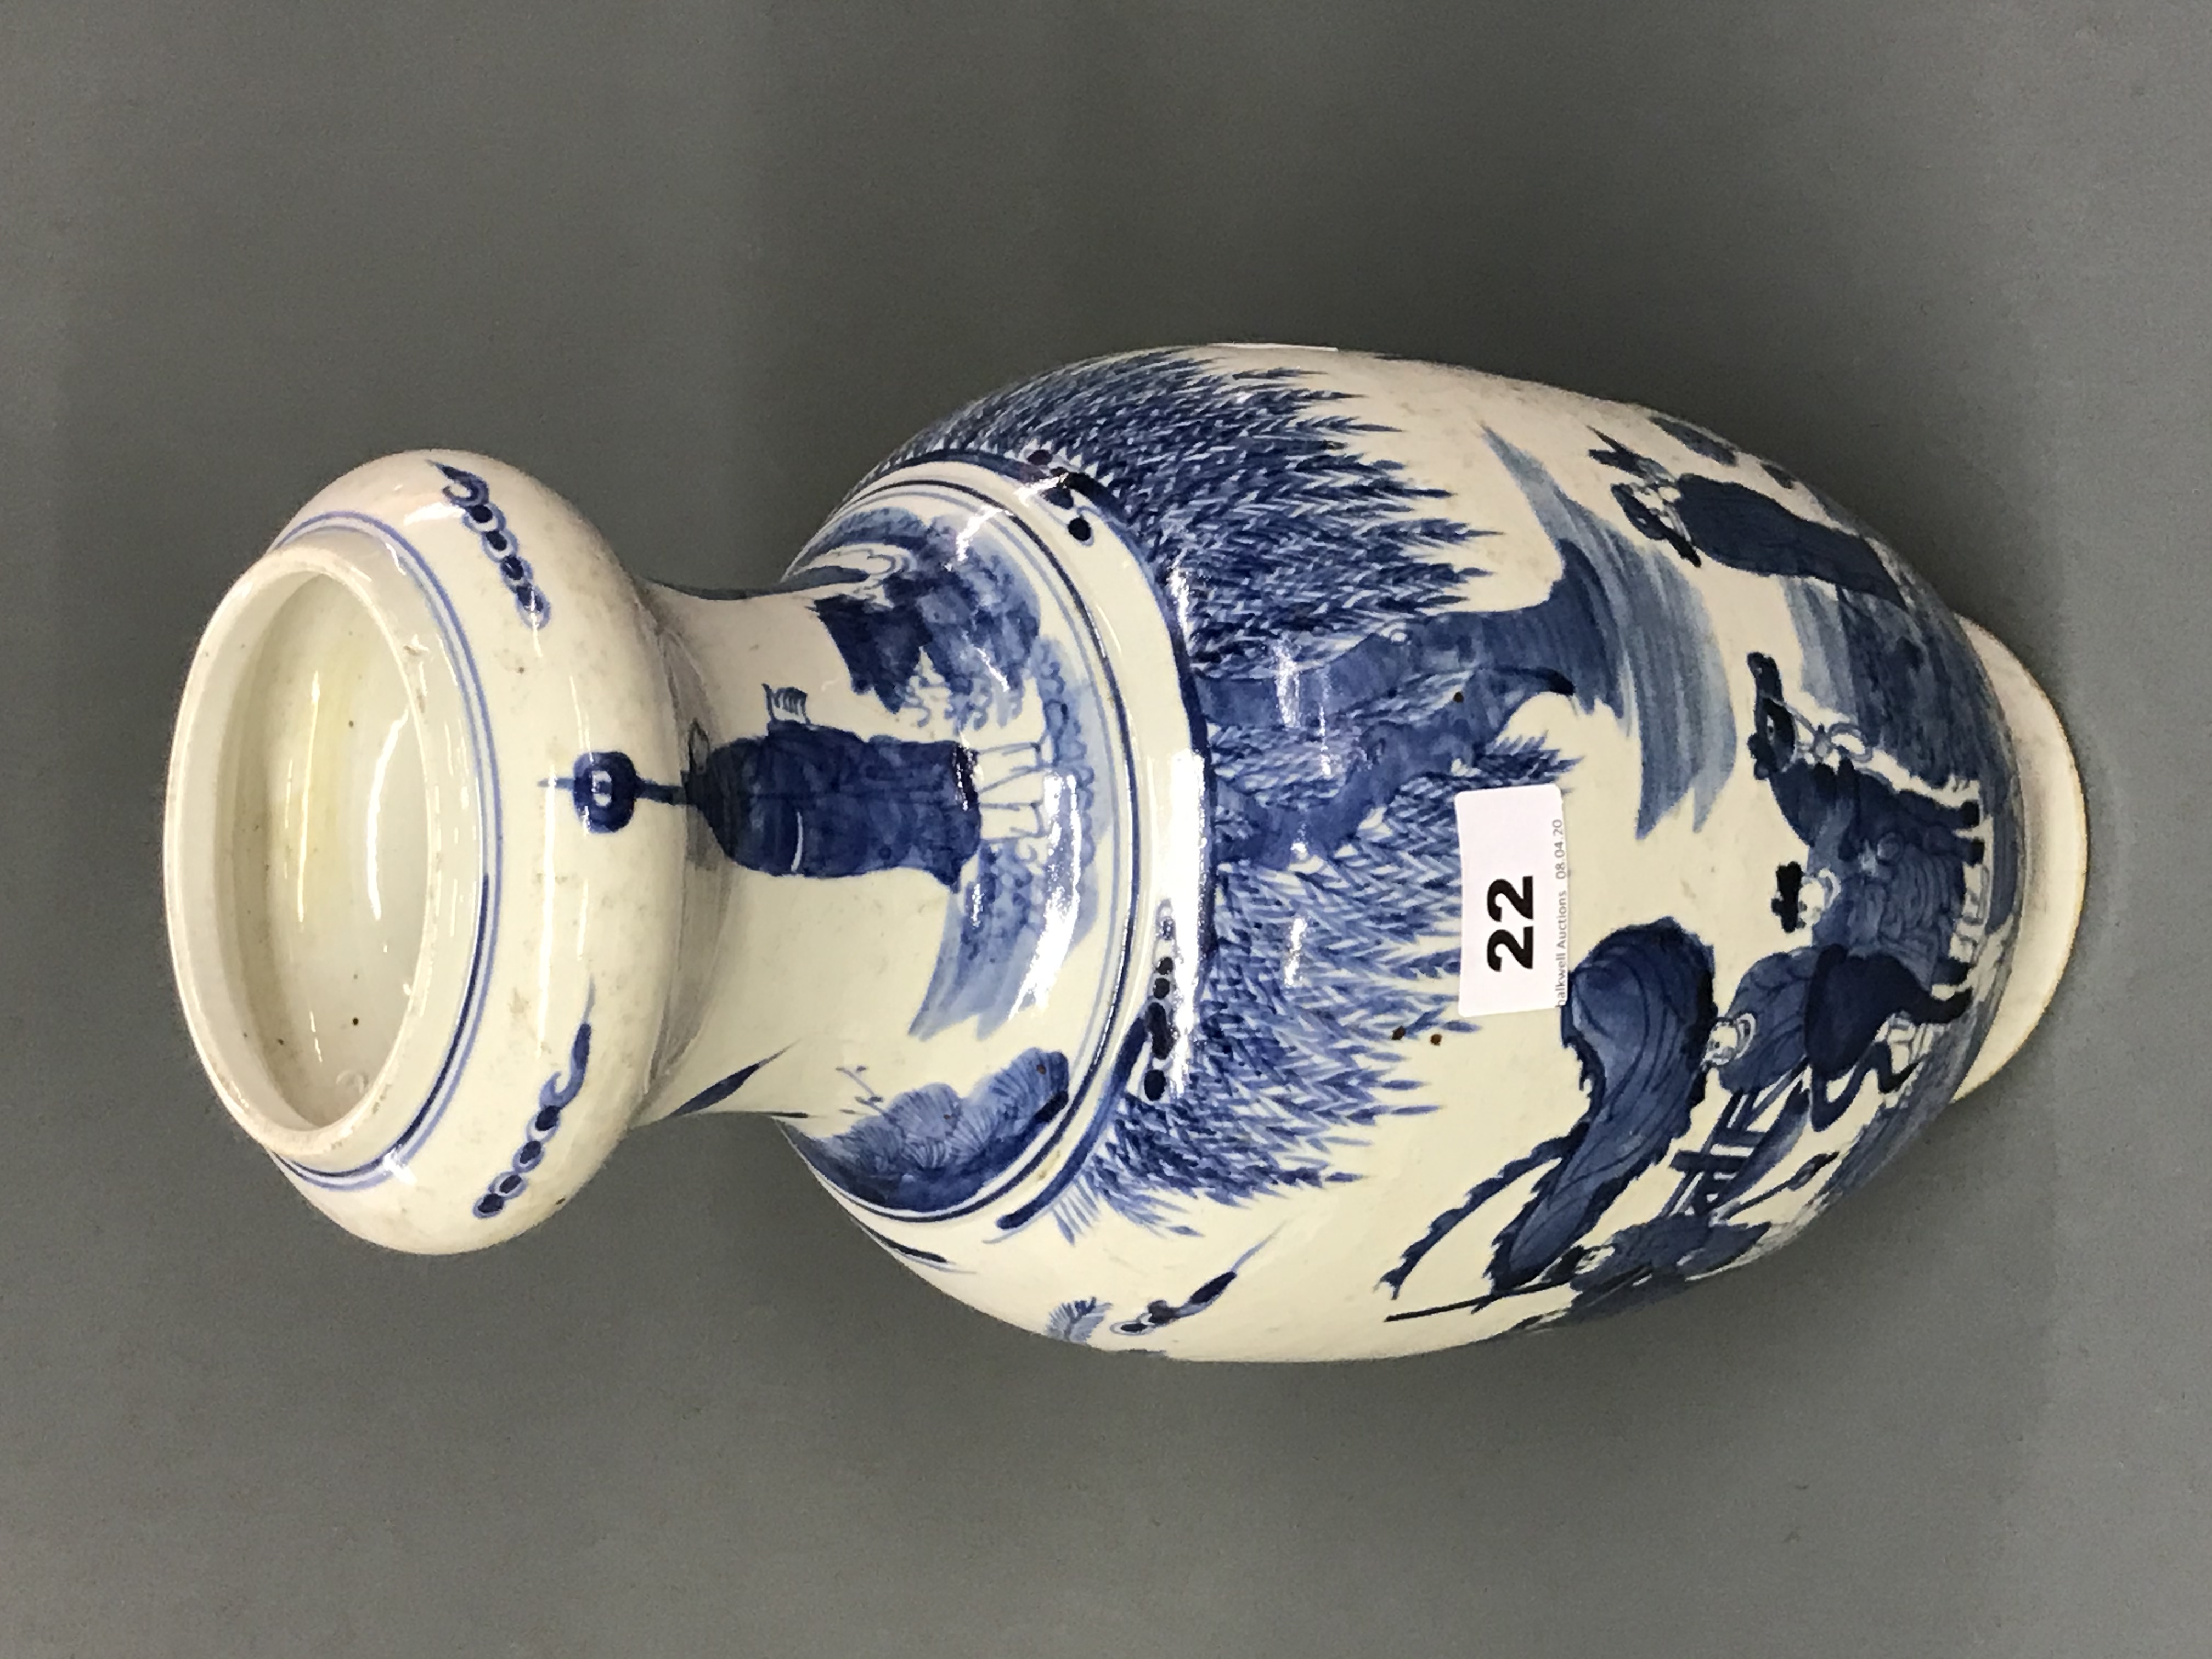 A Chinese hand painted porcelain vase with narrowed neck and decoration of an Emperor and advisers - Image 5 of 6